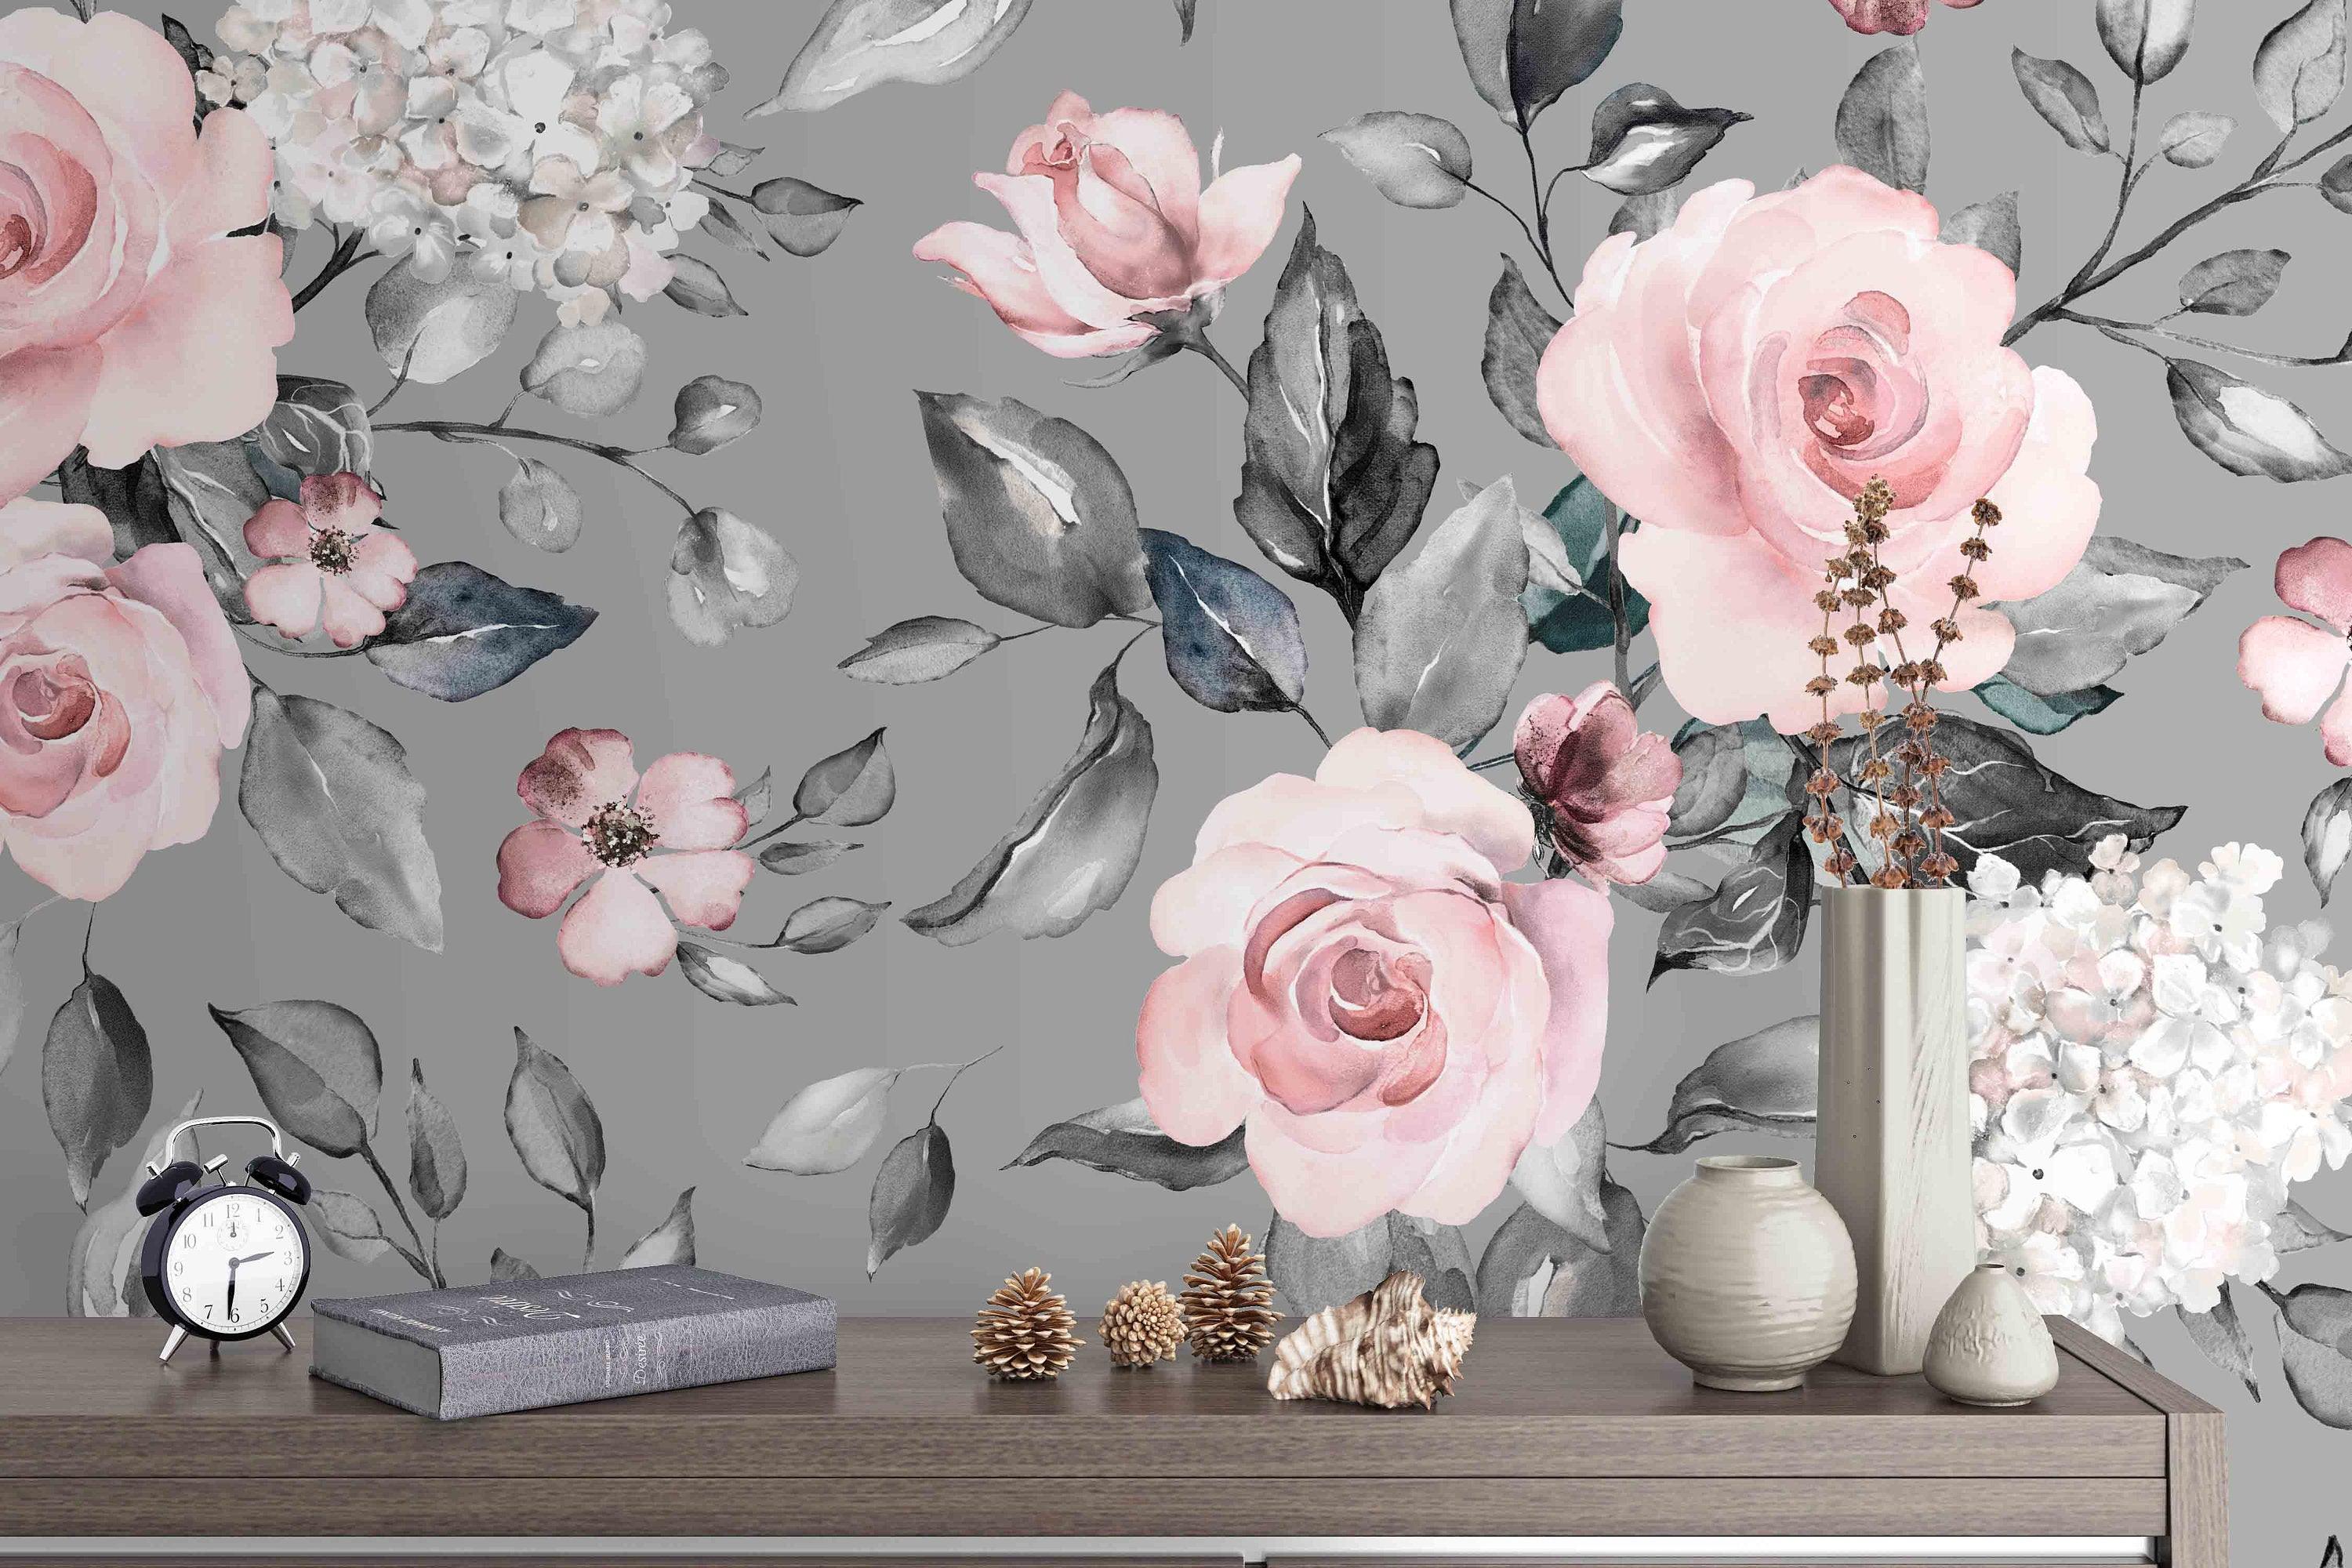 3D spring flowers and leaves Mural Removable Wallpaper,Peel & stick Wall Mural, Floral, Wall Art,Wall Decal,Wall Sticker,Jess Art 42- Jess Art Decoration